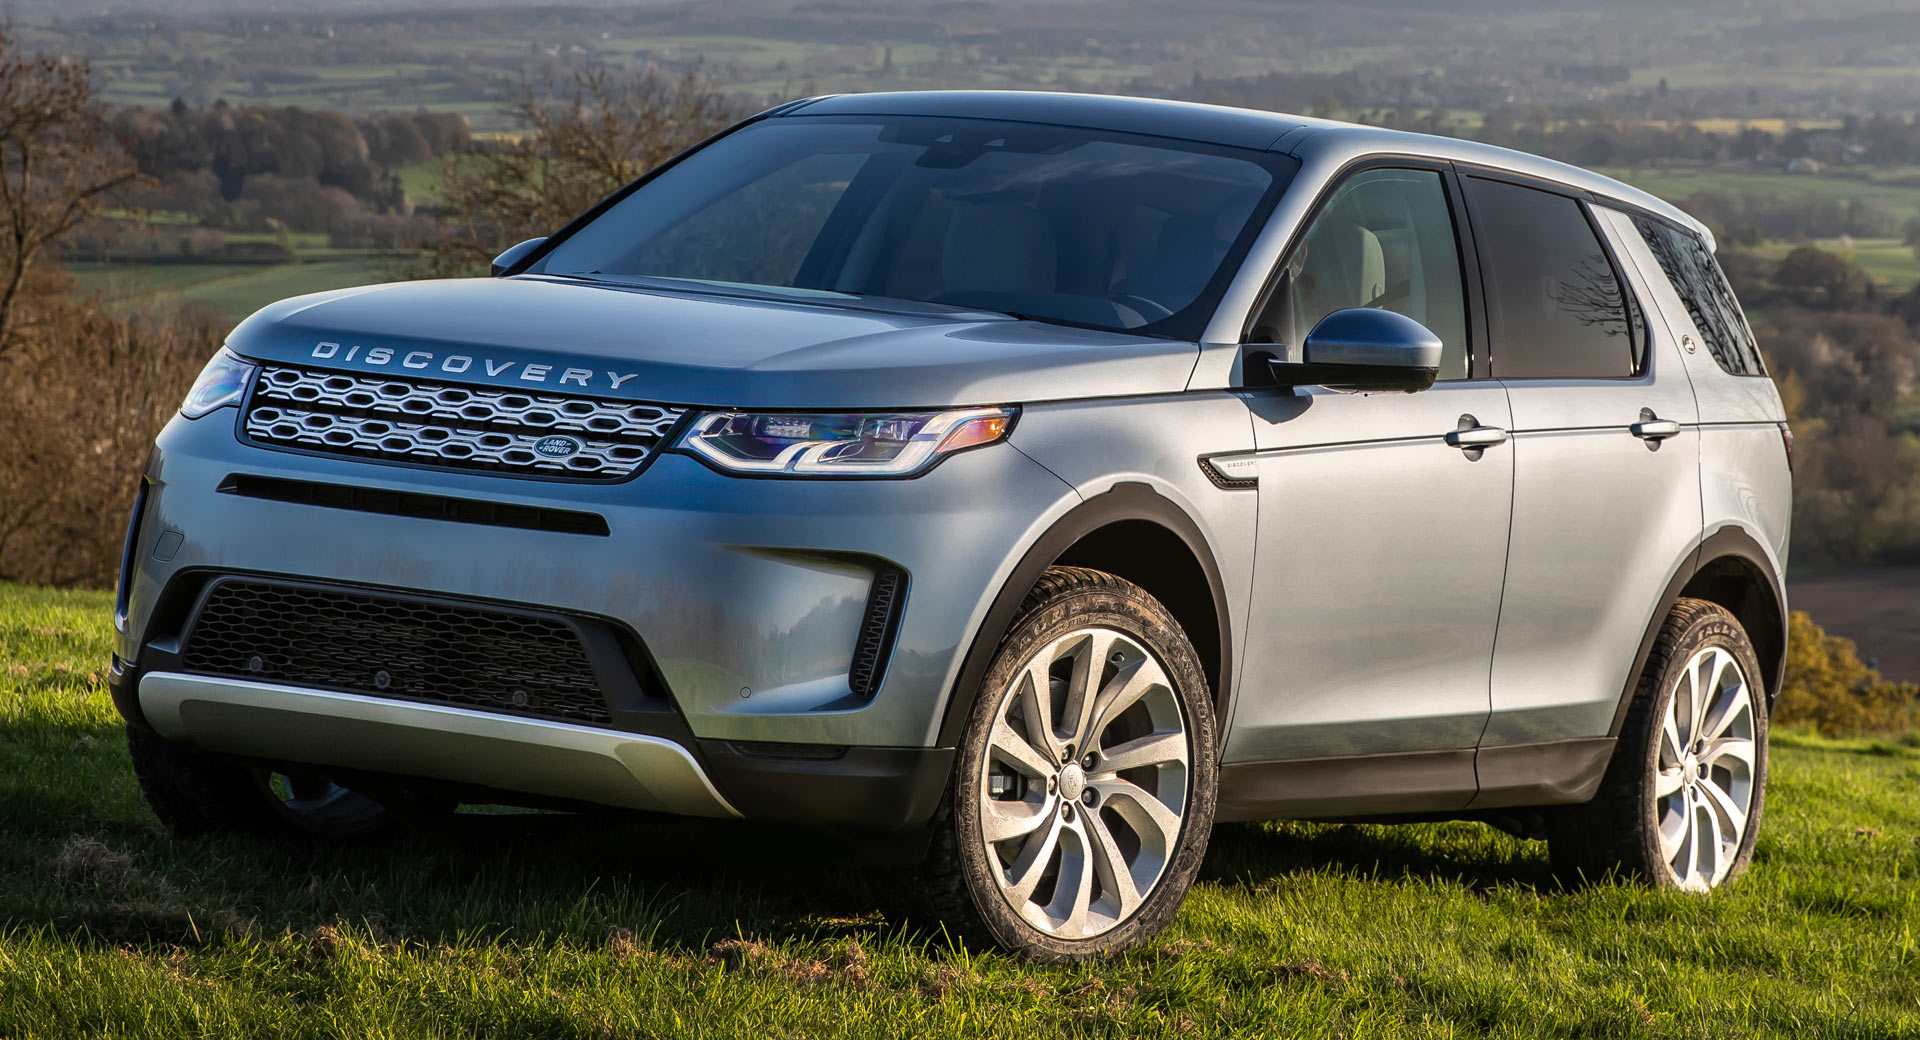 2020 Land Rover Discovery Sport Facelift Debuts With New